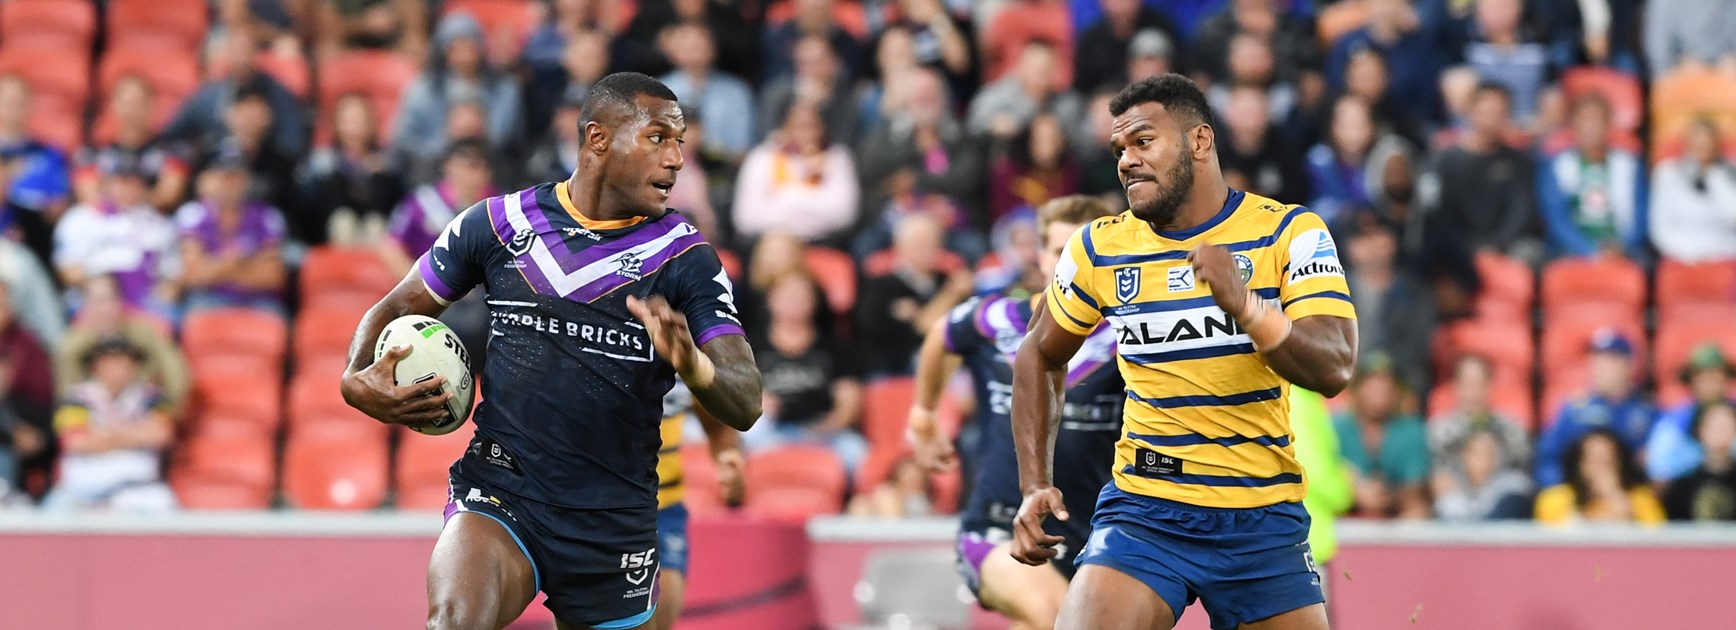 Rugby-bound Vunivalu out to make final Storm season count